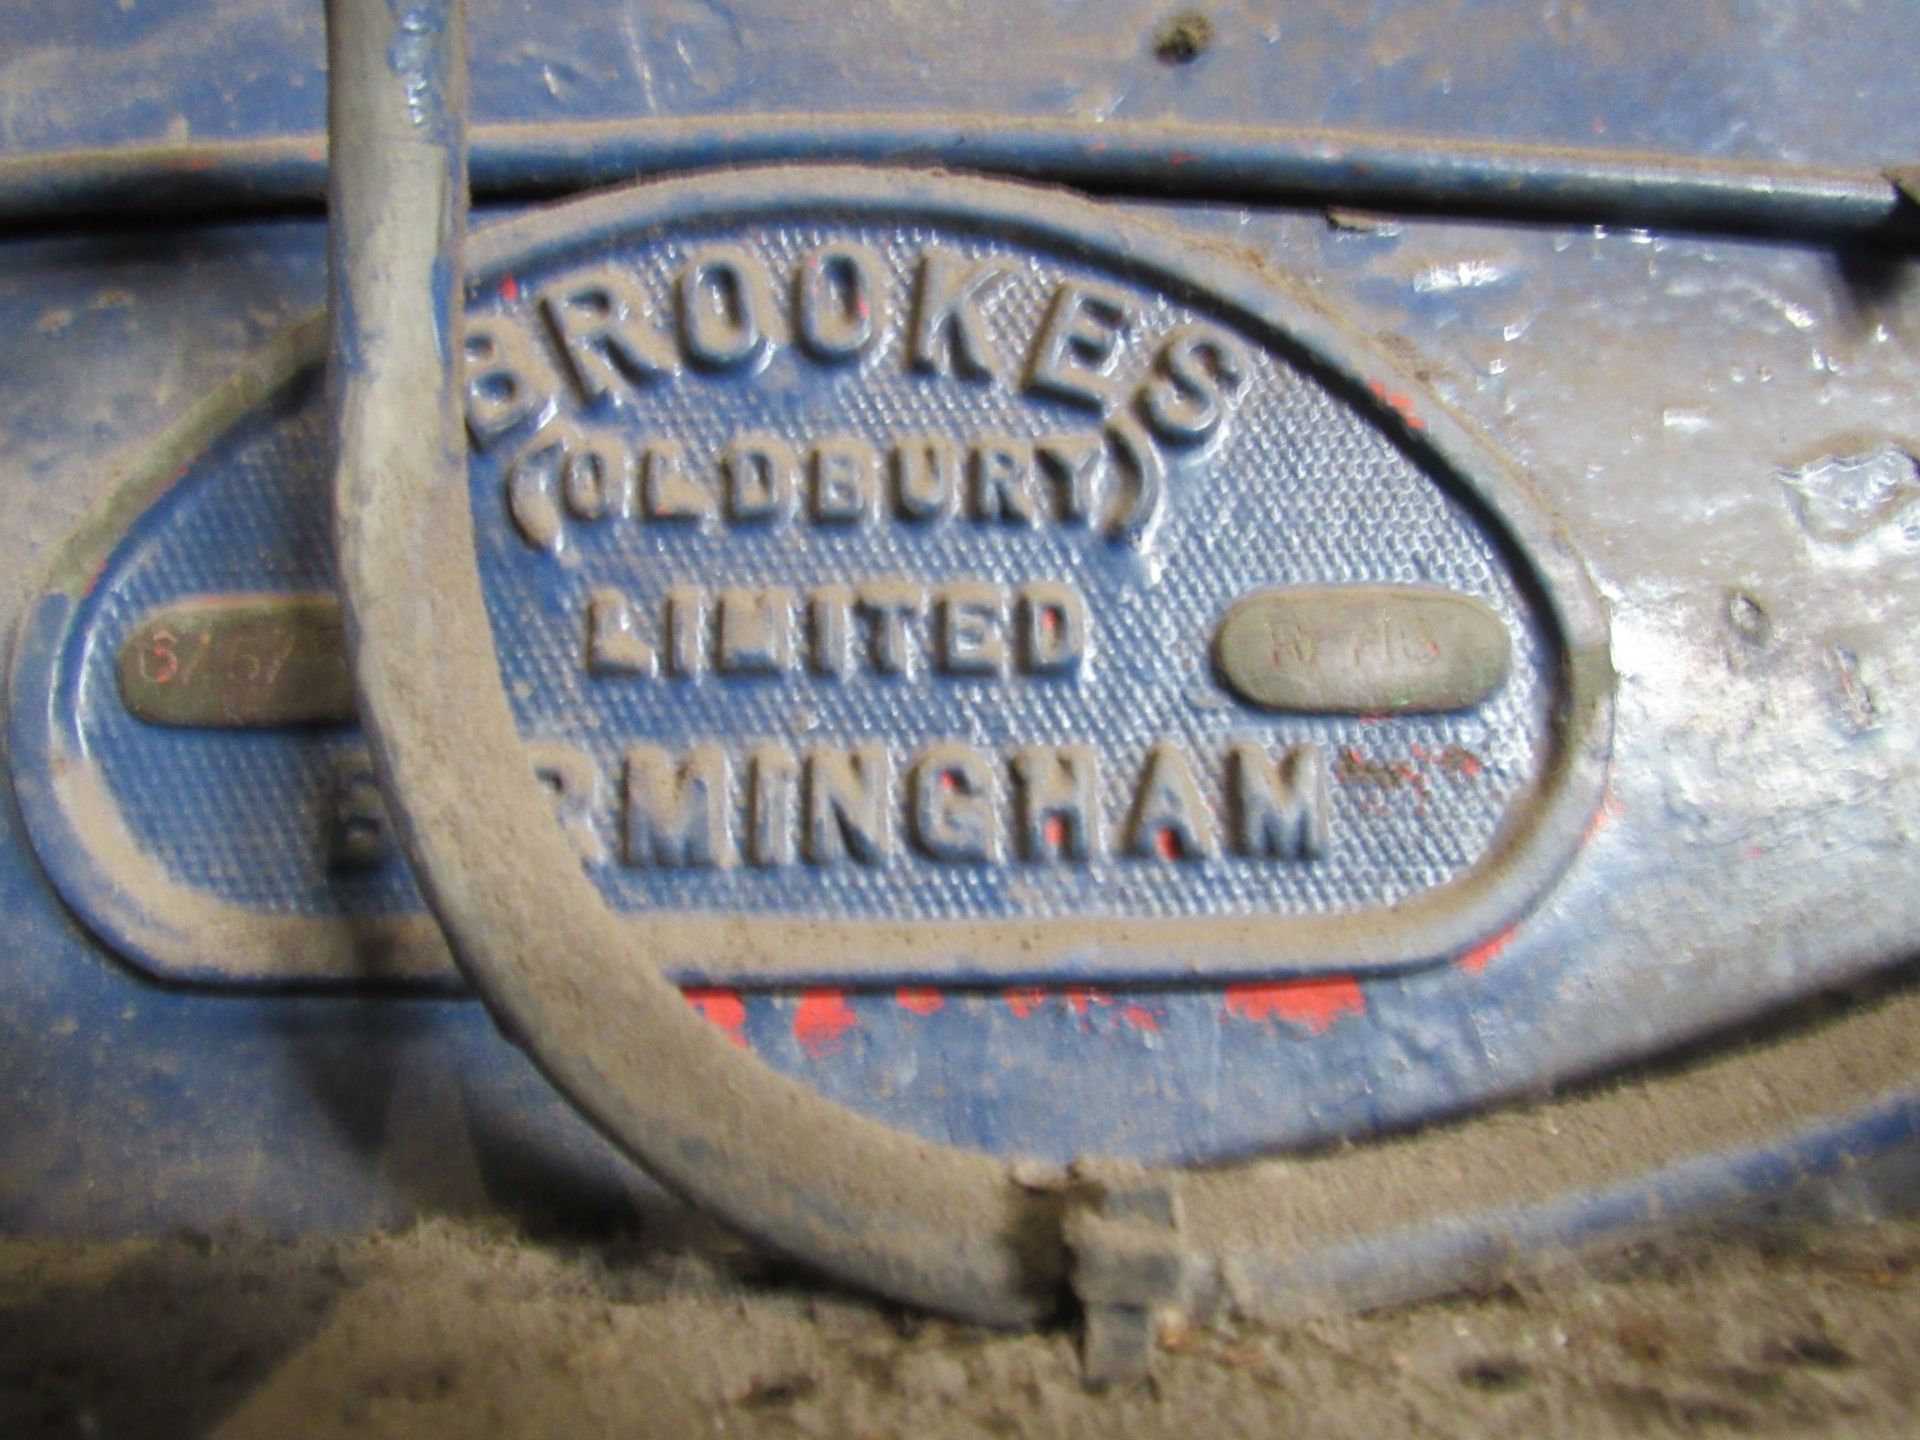 Brookes Shear 1200 x 12 capacity, 6/5/52, R718 (Requires disconnection by qualified electrician - Image 4 of 5